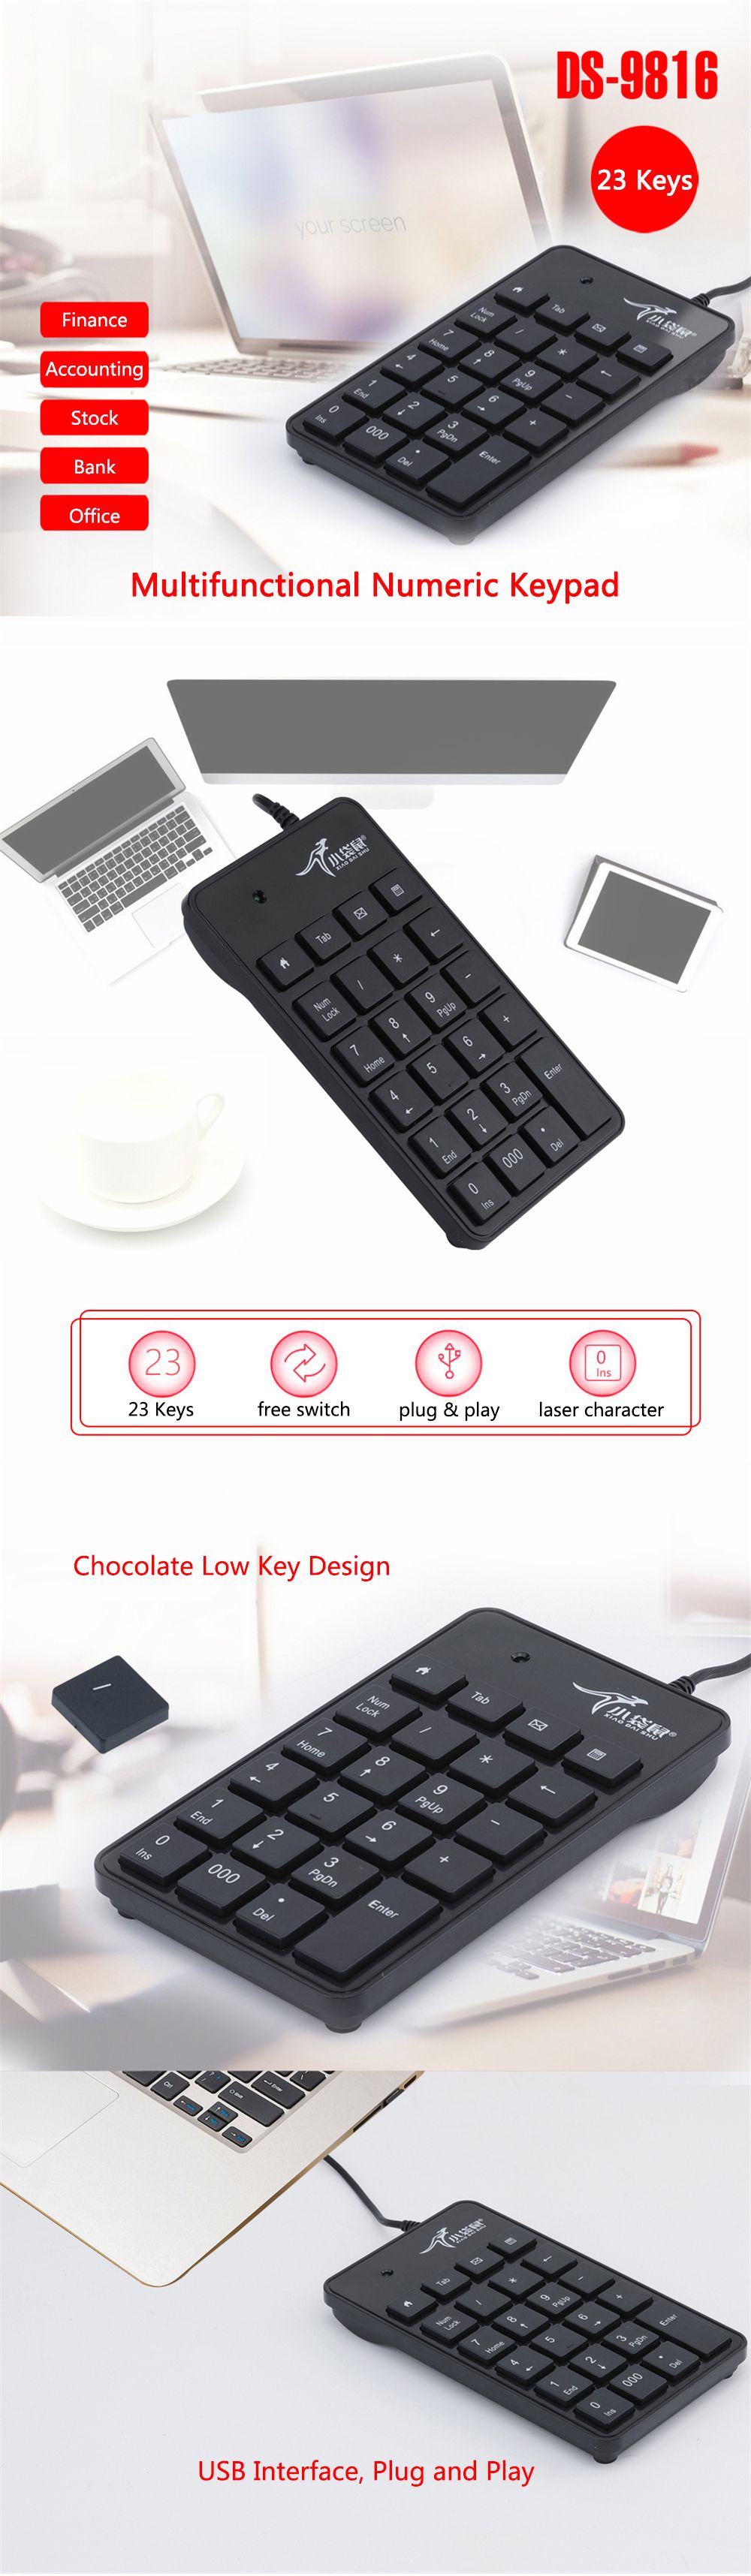 DS-9816-23-Keys-Wired-Numeric-Keypad-USB-Mini-Number-Keyboard-for-Office-Bank-Stock-1716158